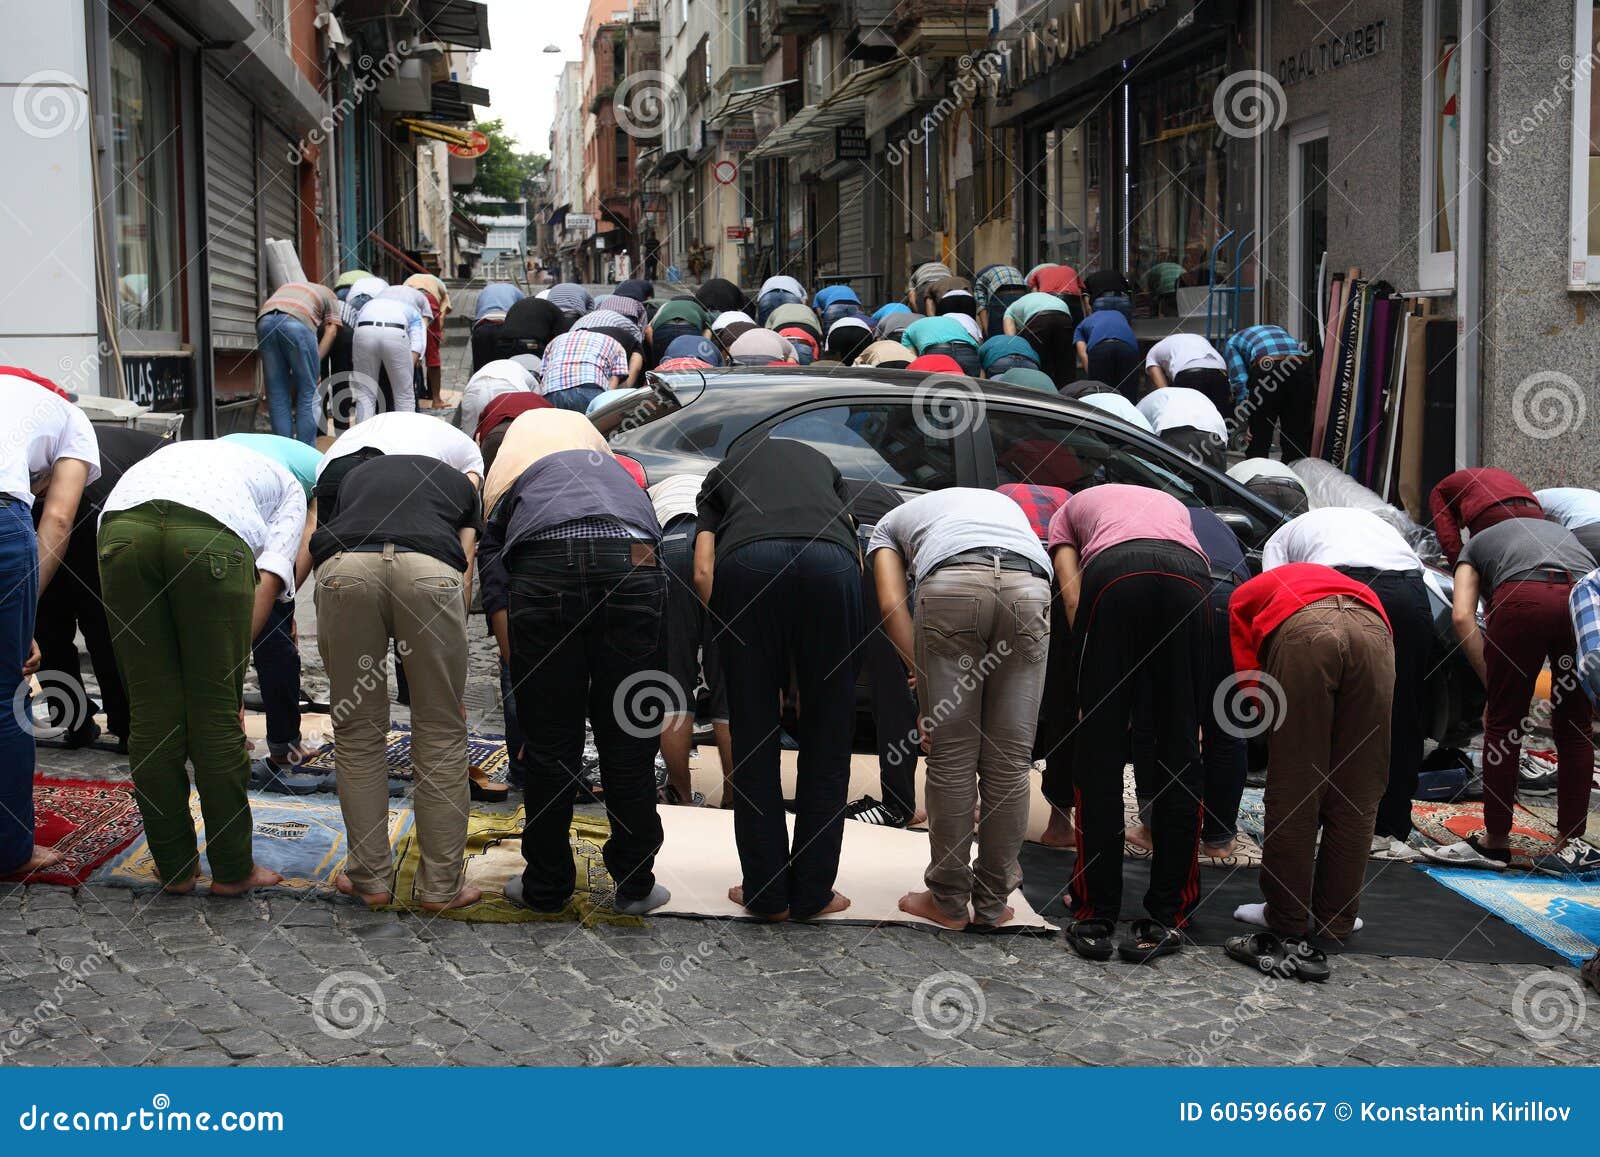 namaz time editorial photography image of middle trust 60596667